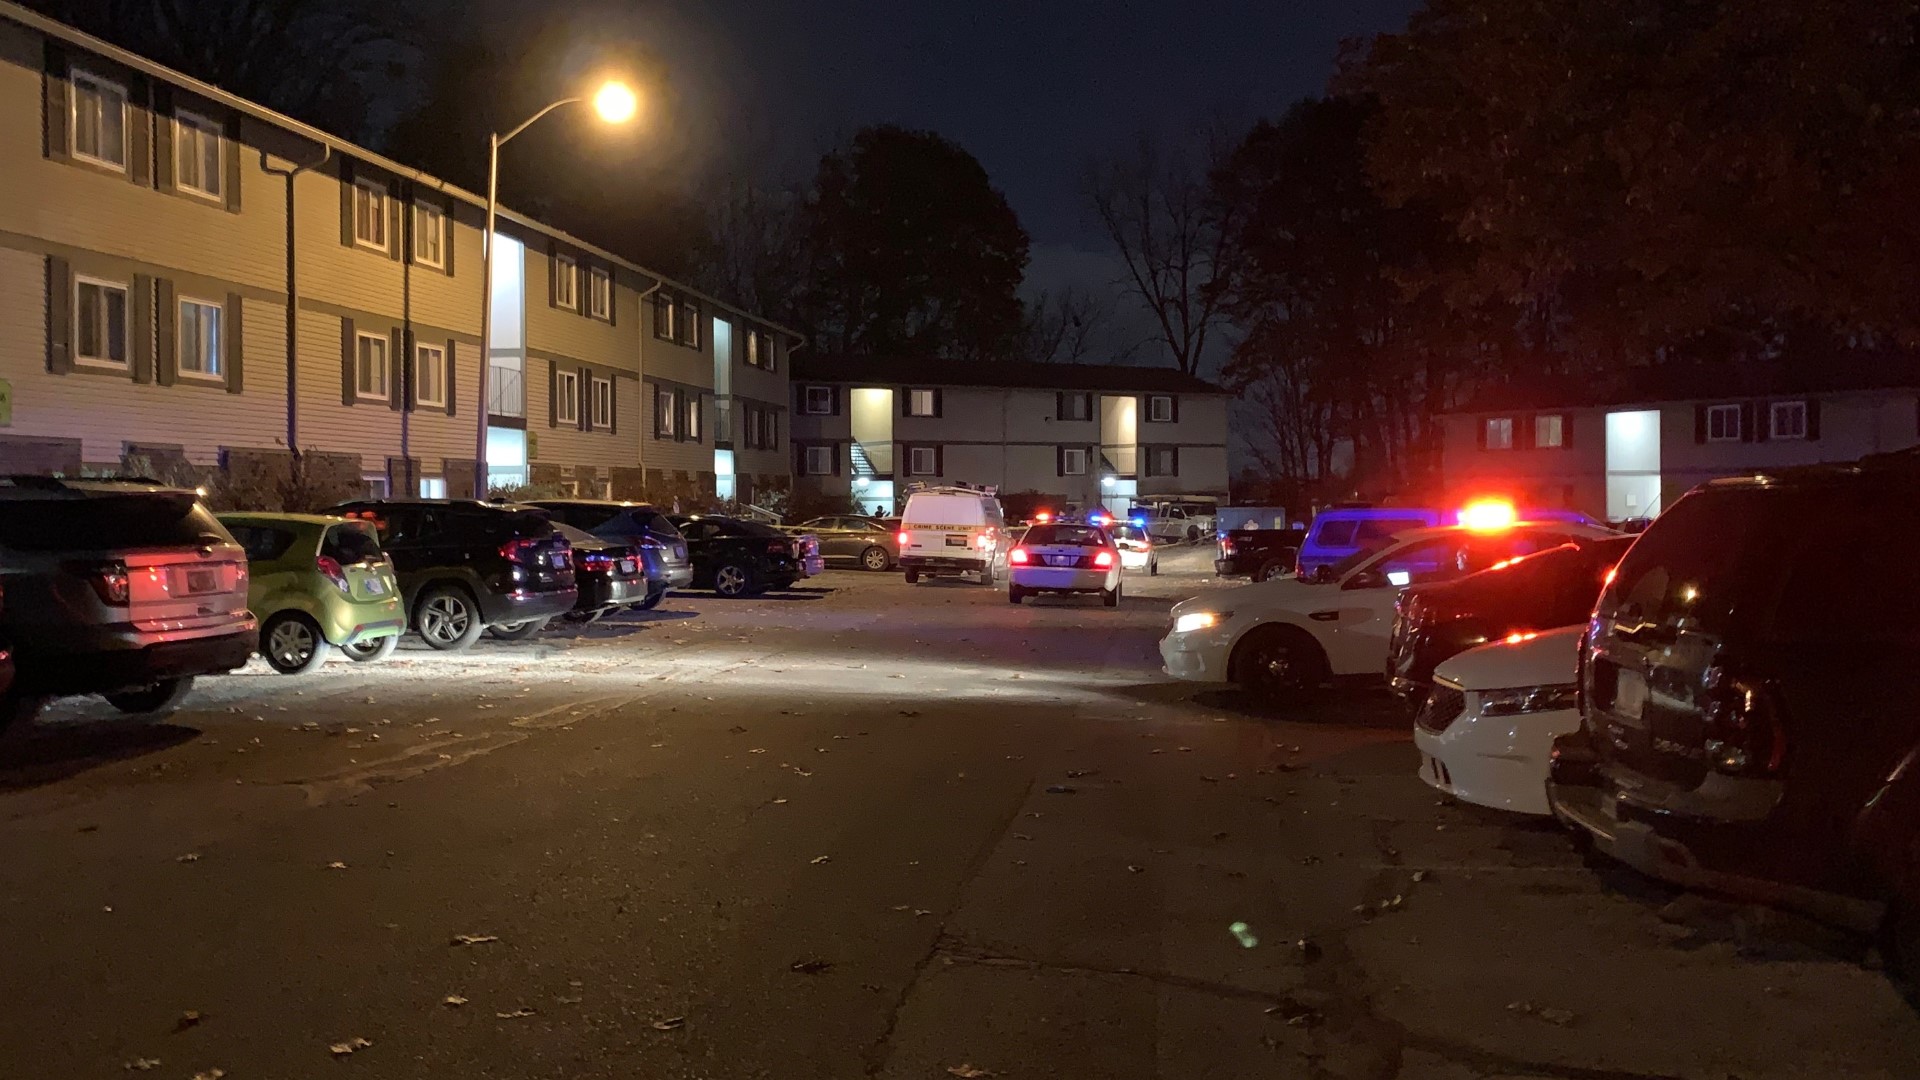 The shooting comes less than a day after another shooting, this one fatal, that broke the city's record number of homicides ever recorded in one year.